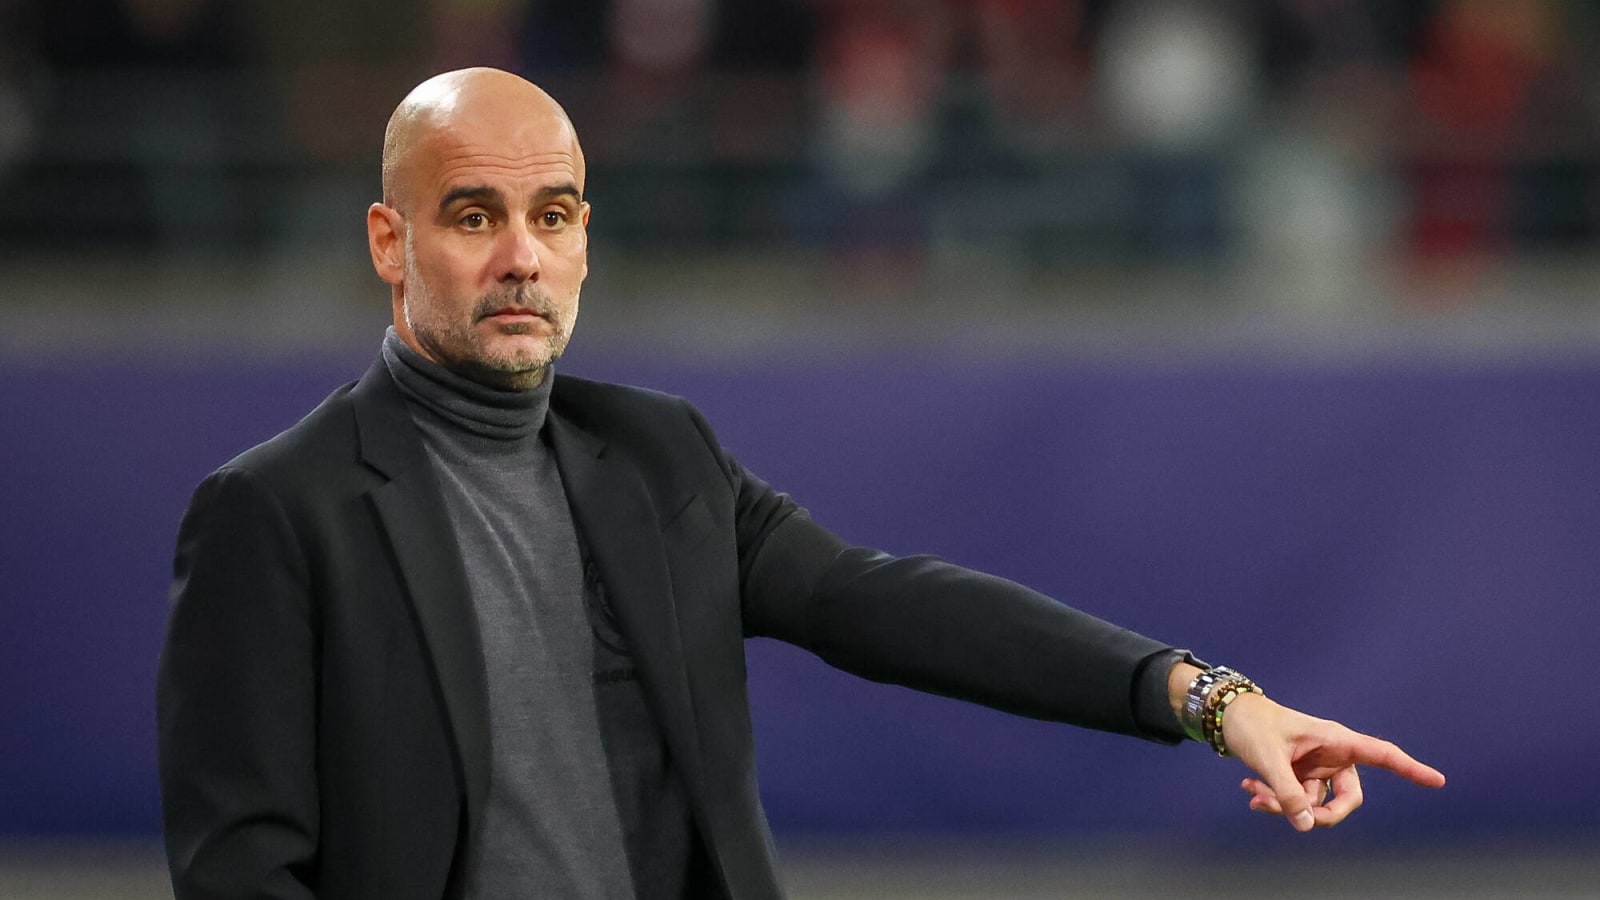 Could Pep Guardiola and Manchester City make a move for a German prodigy?